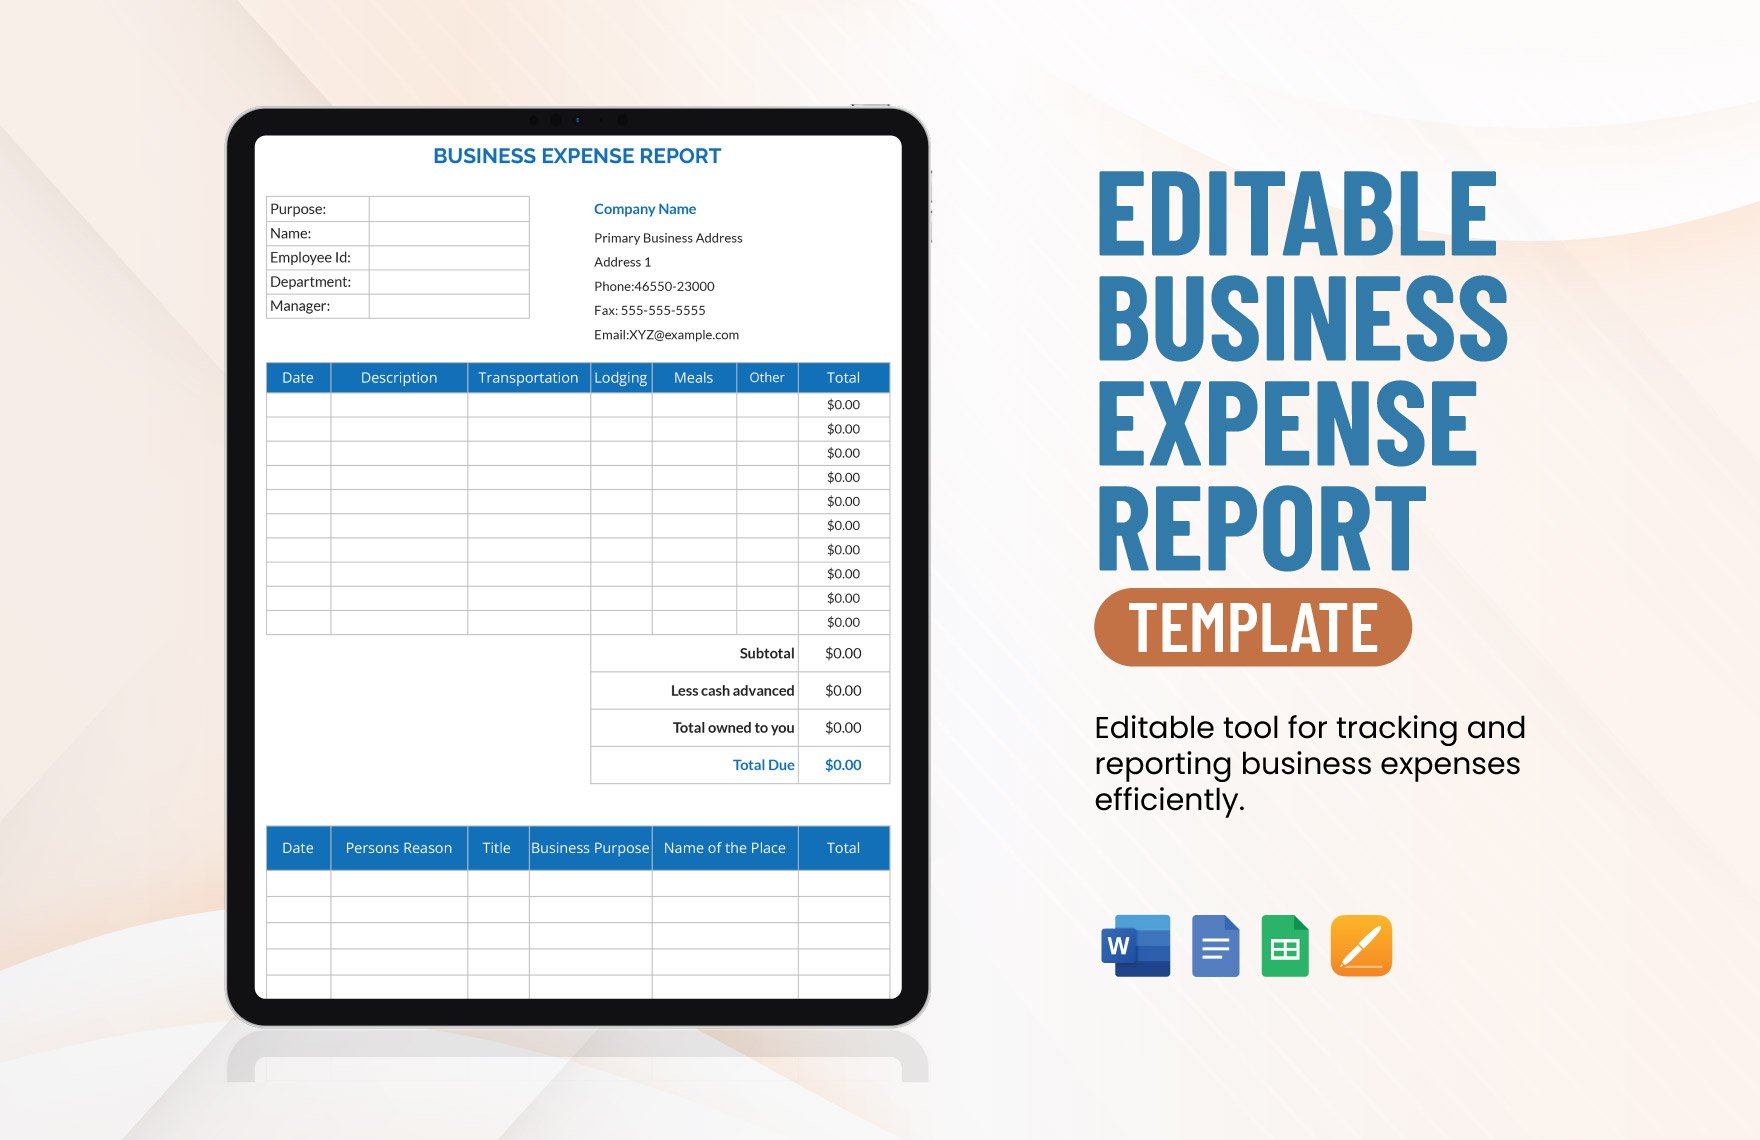 Editable Business Expense Report Template in Word, Google Docs, Google Sheets, Apple Pages